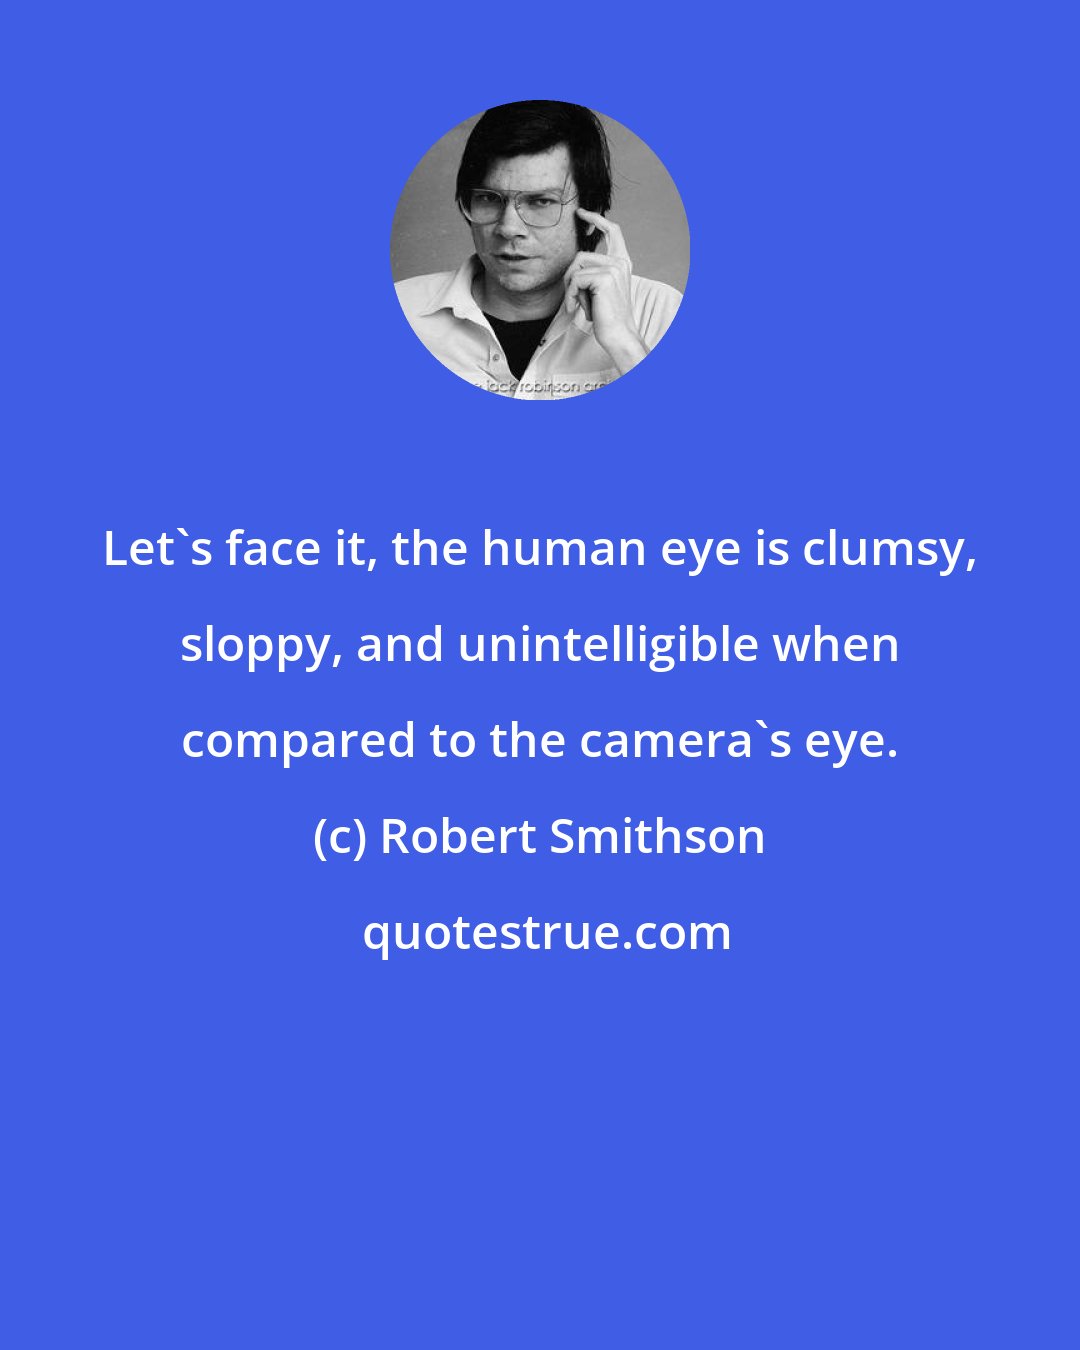 Robert Smithson: Let's face it, the human eye is clumsy, sloppy, and unintelligible when compared to the camera's eye.